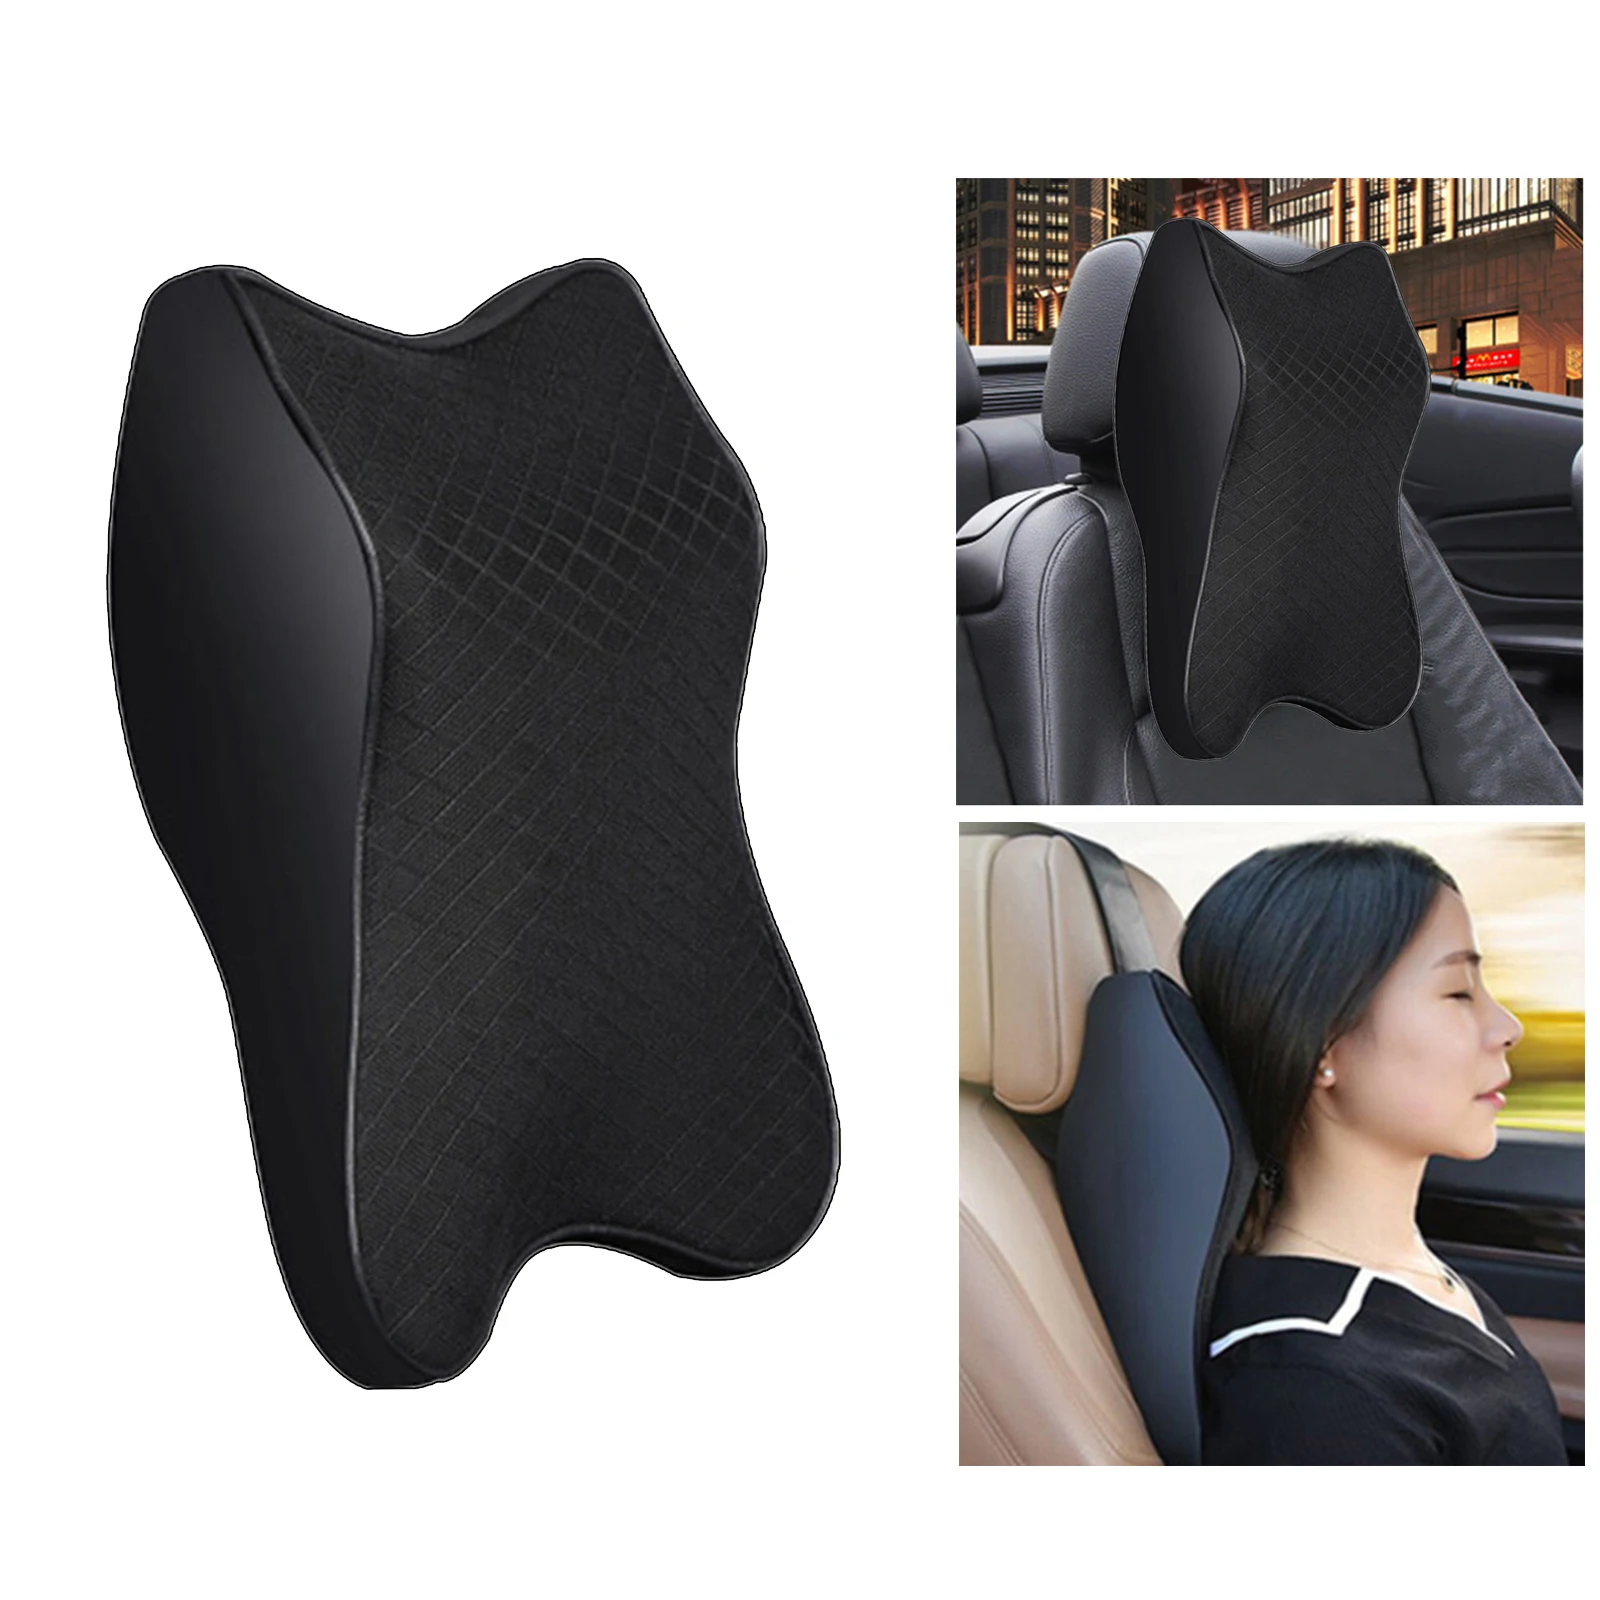 Car Neck Cushion Car Seat Neck Pillow Headrest Cushion for Neck Back Pain Relief Lumbar Support for Car Seat Office Chair